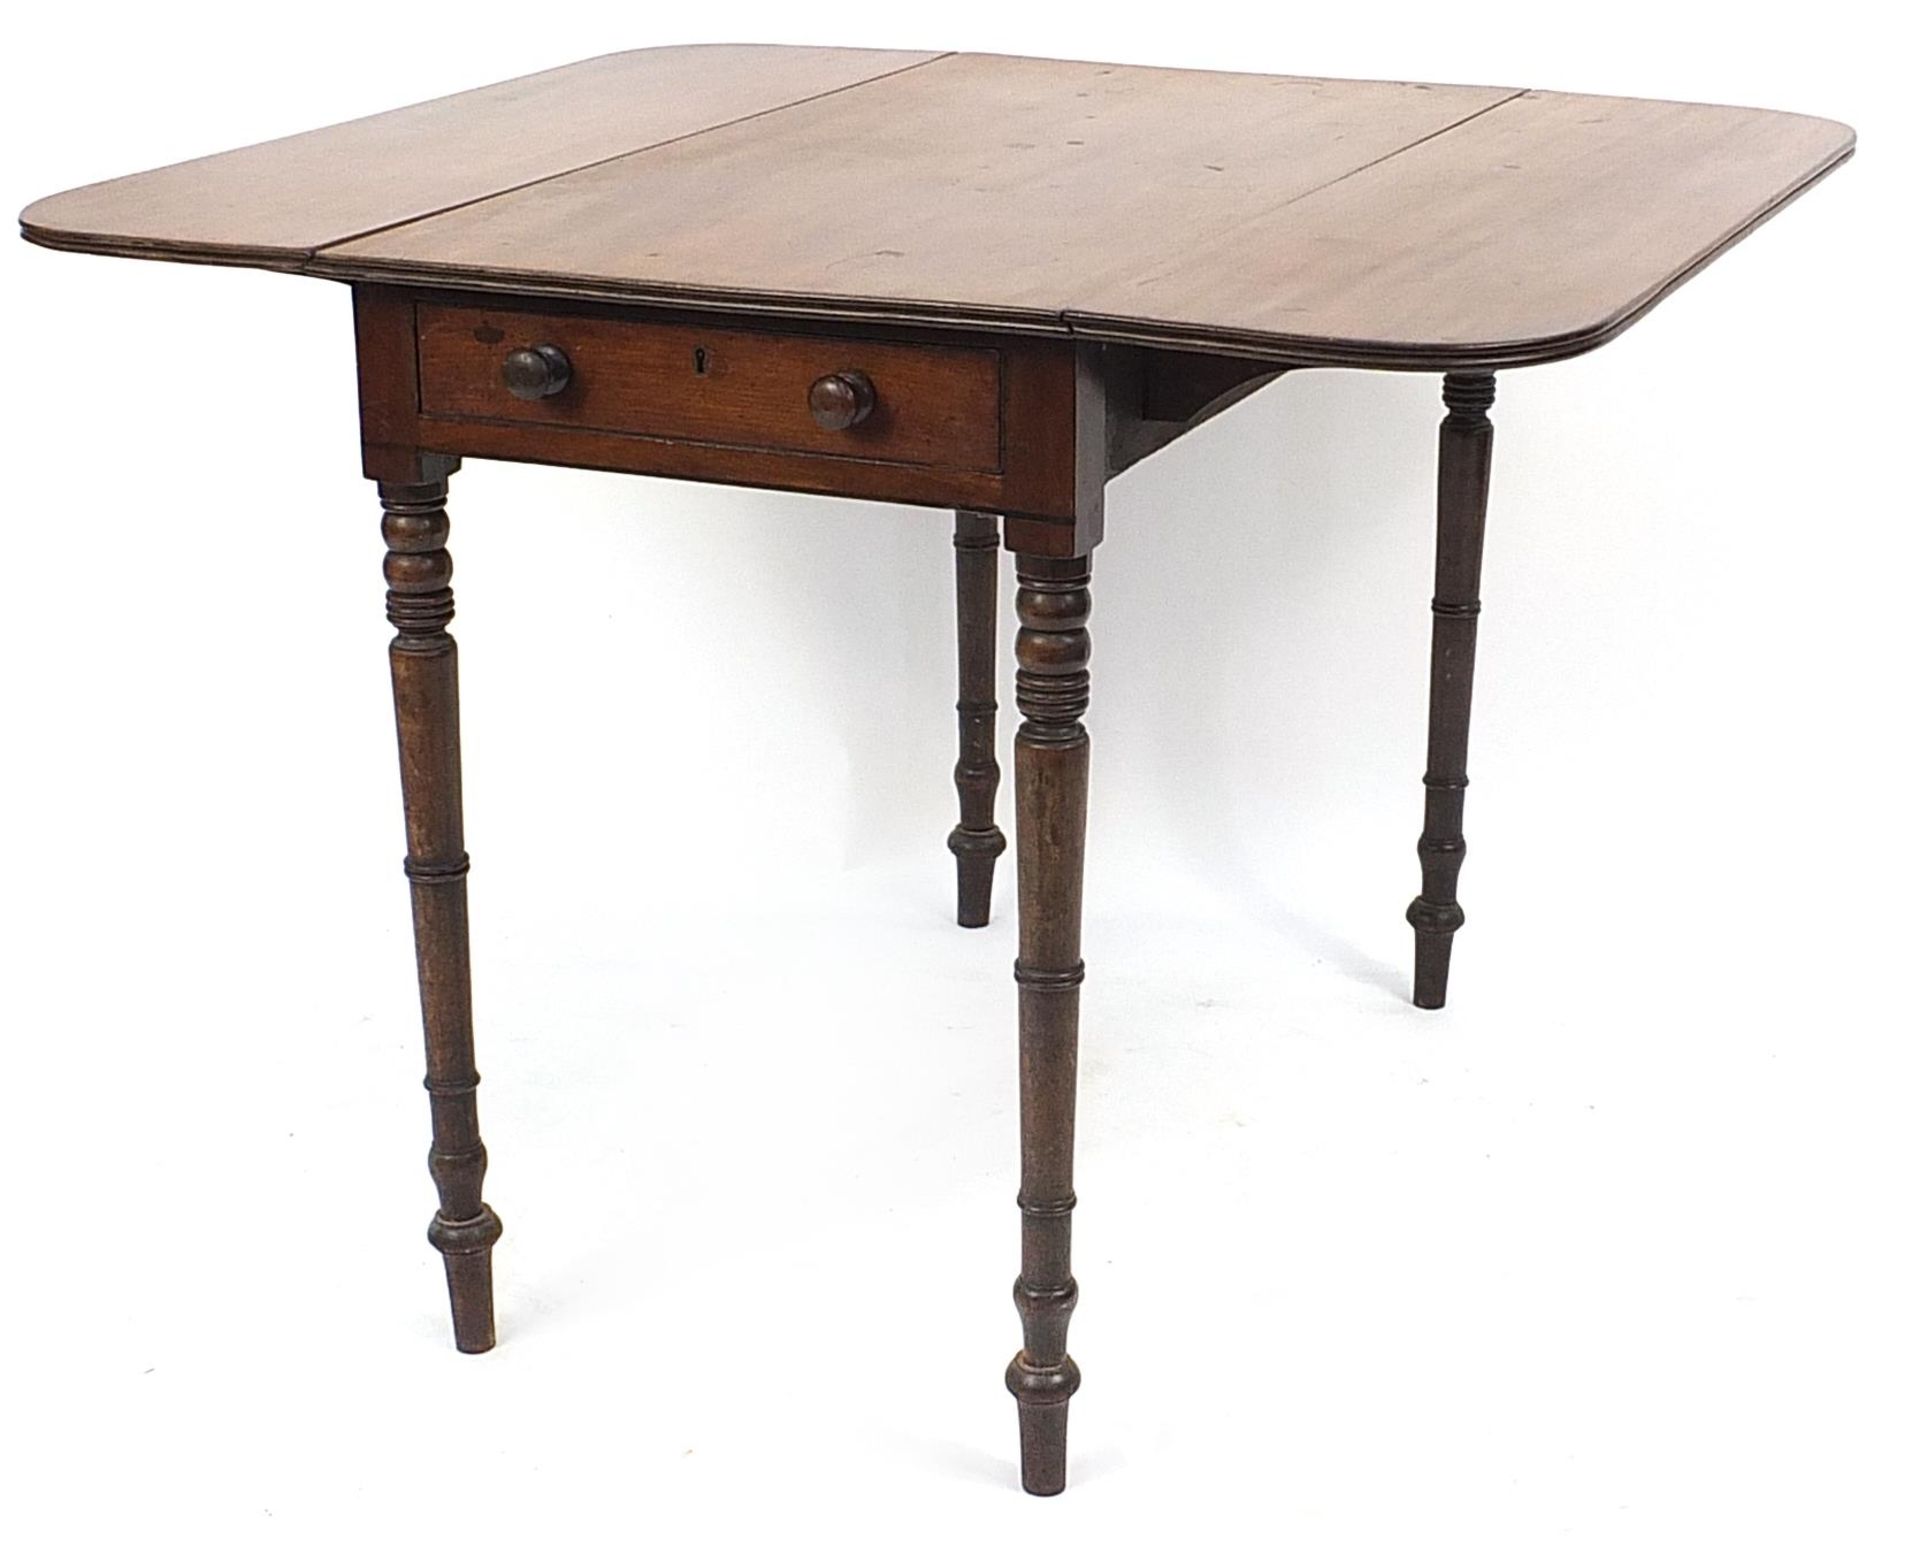 Victorian mahogany Pembroke table with drawer to the end, 72cm H x 89cm W x 49cm D - Image 2 of 4